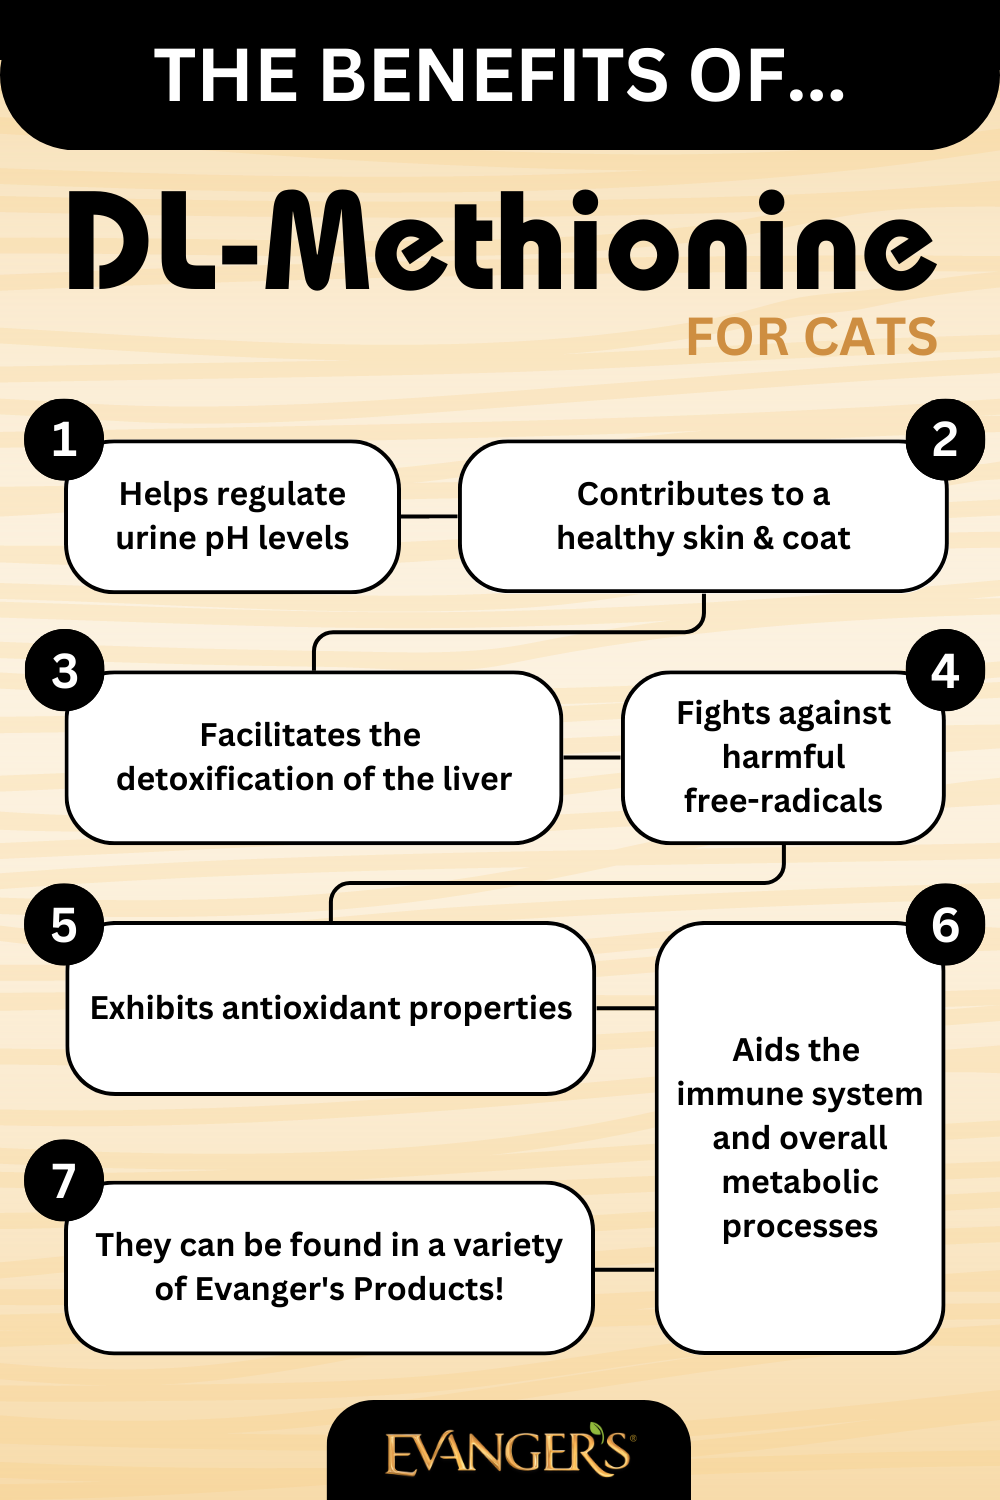 The Benefits of DL-Methionine for Cats